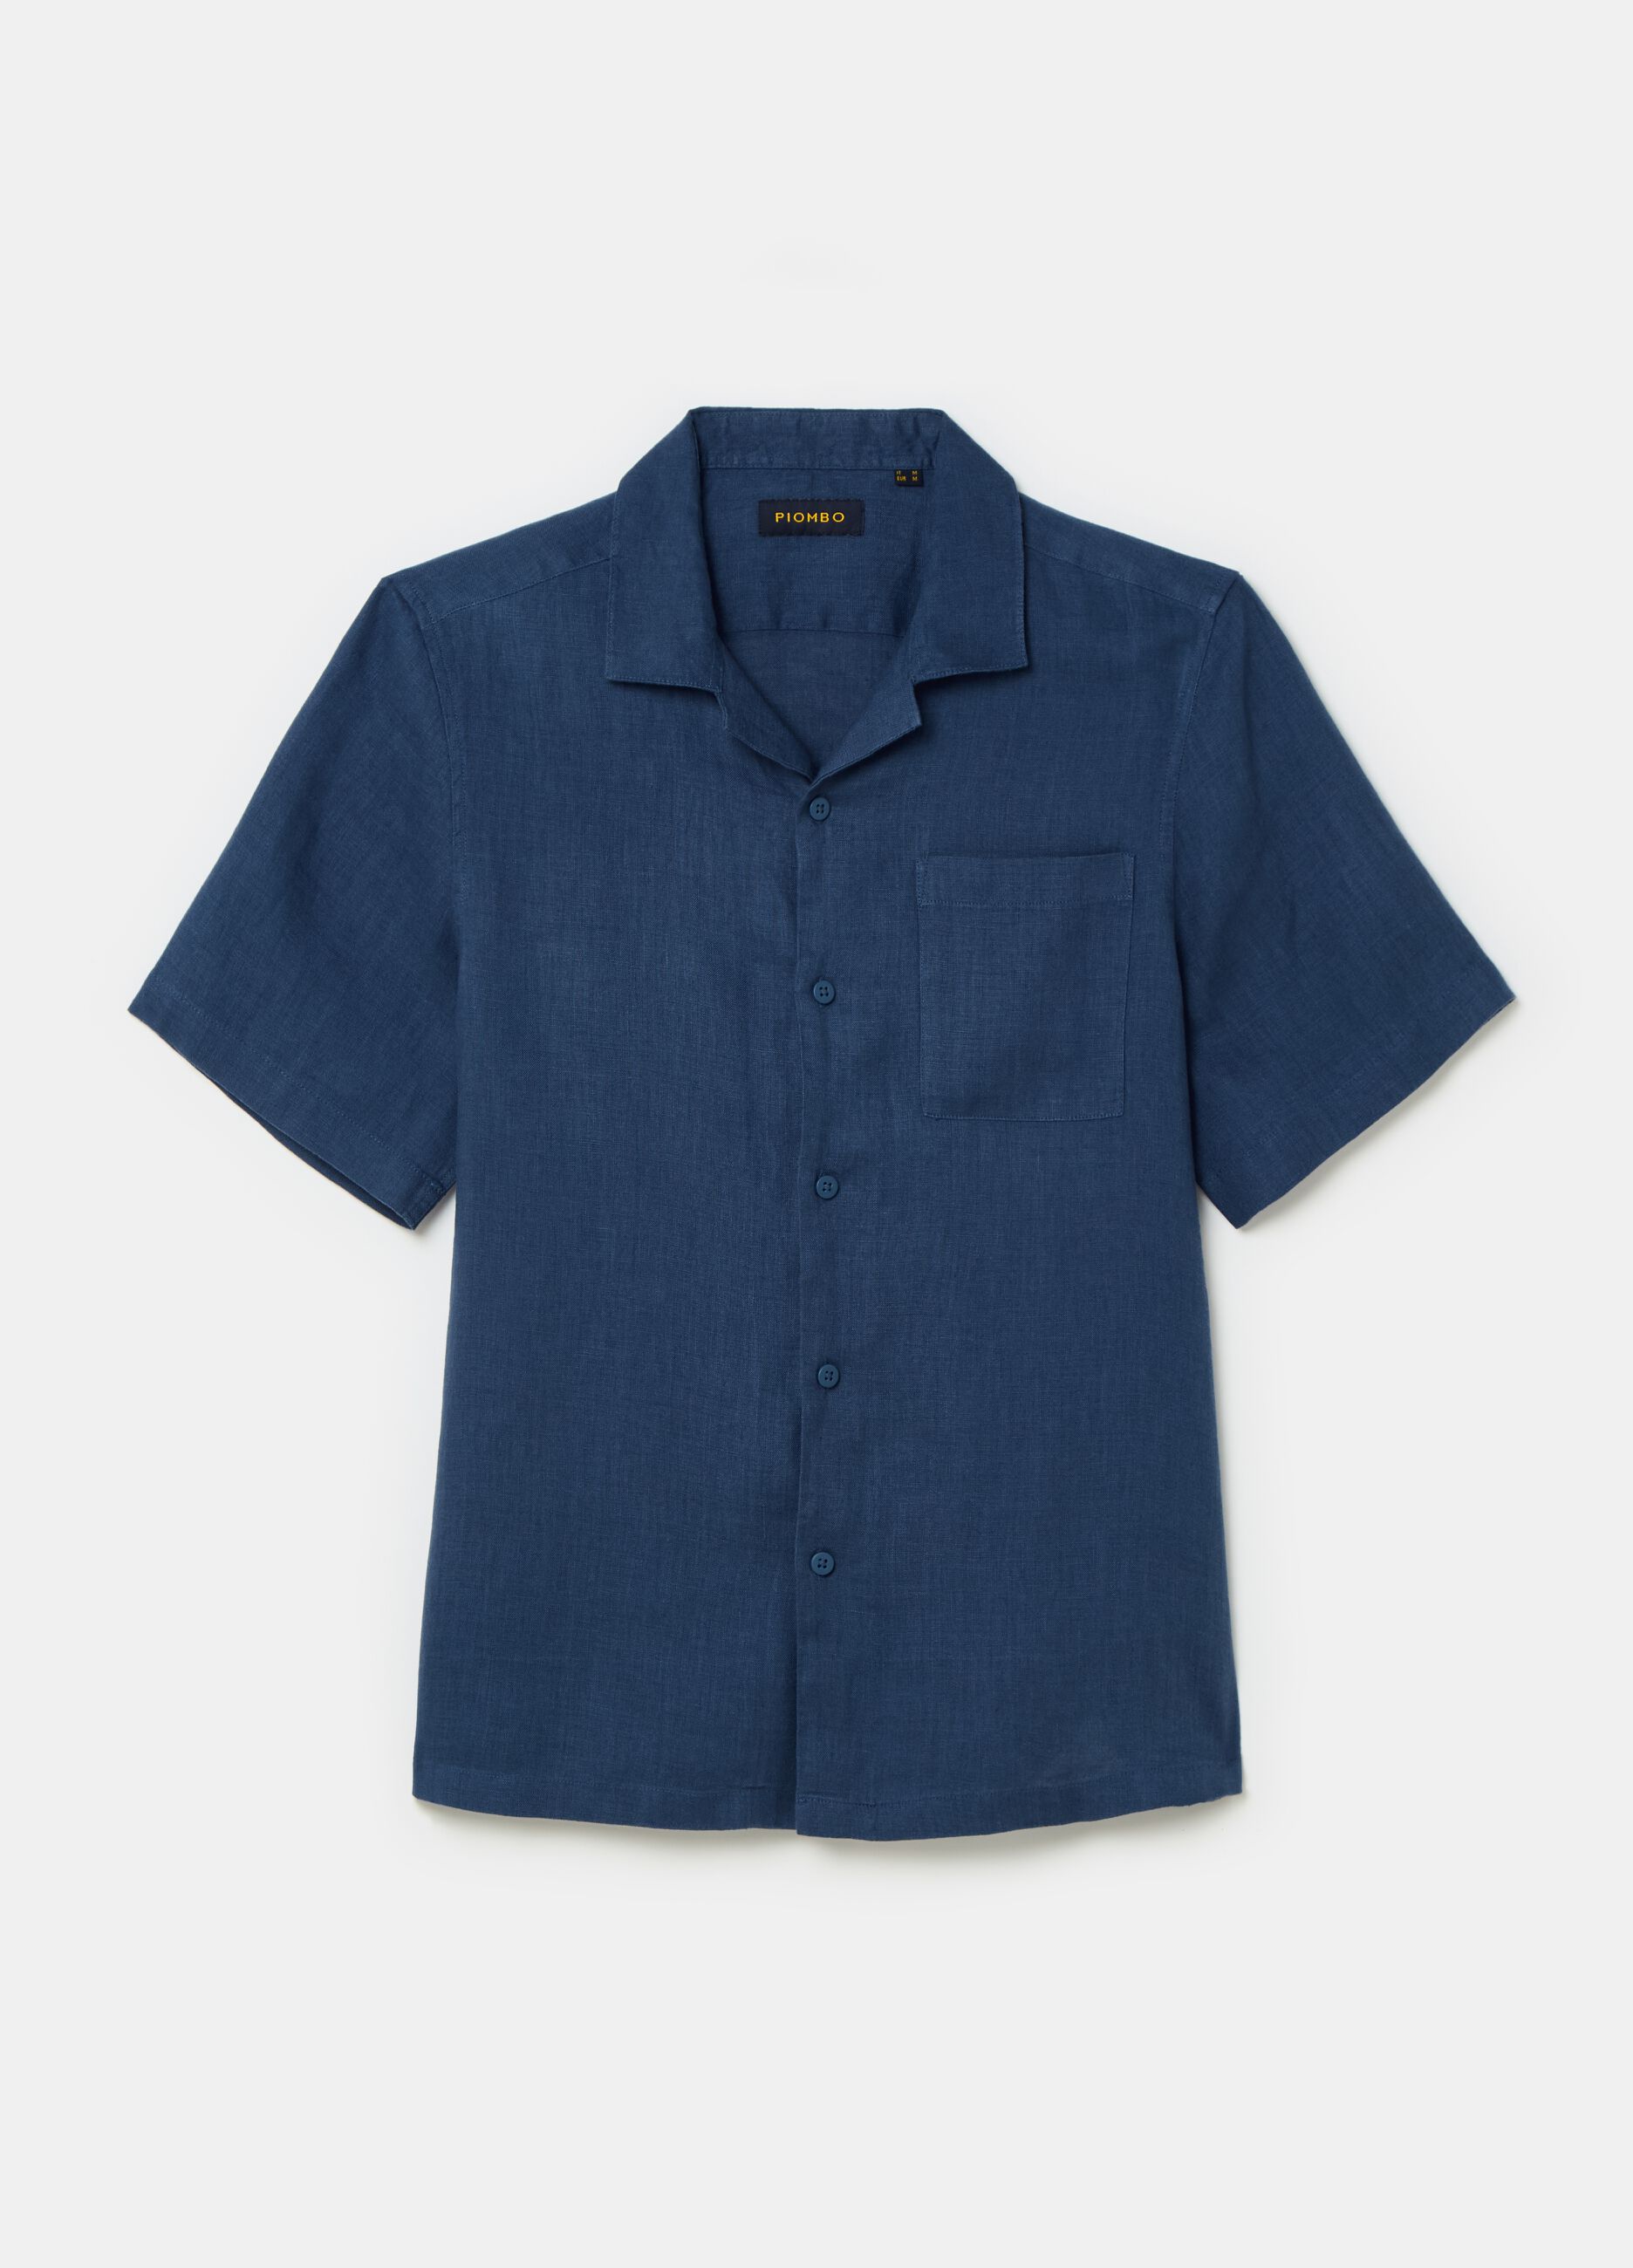 100% linen shirt with short sleeves